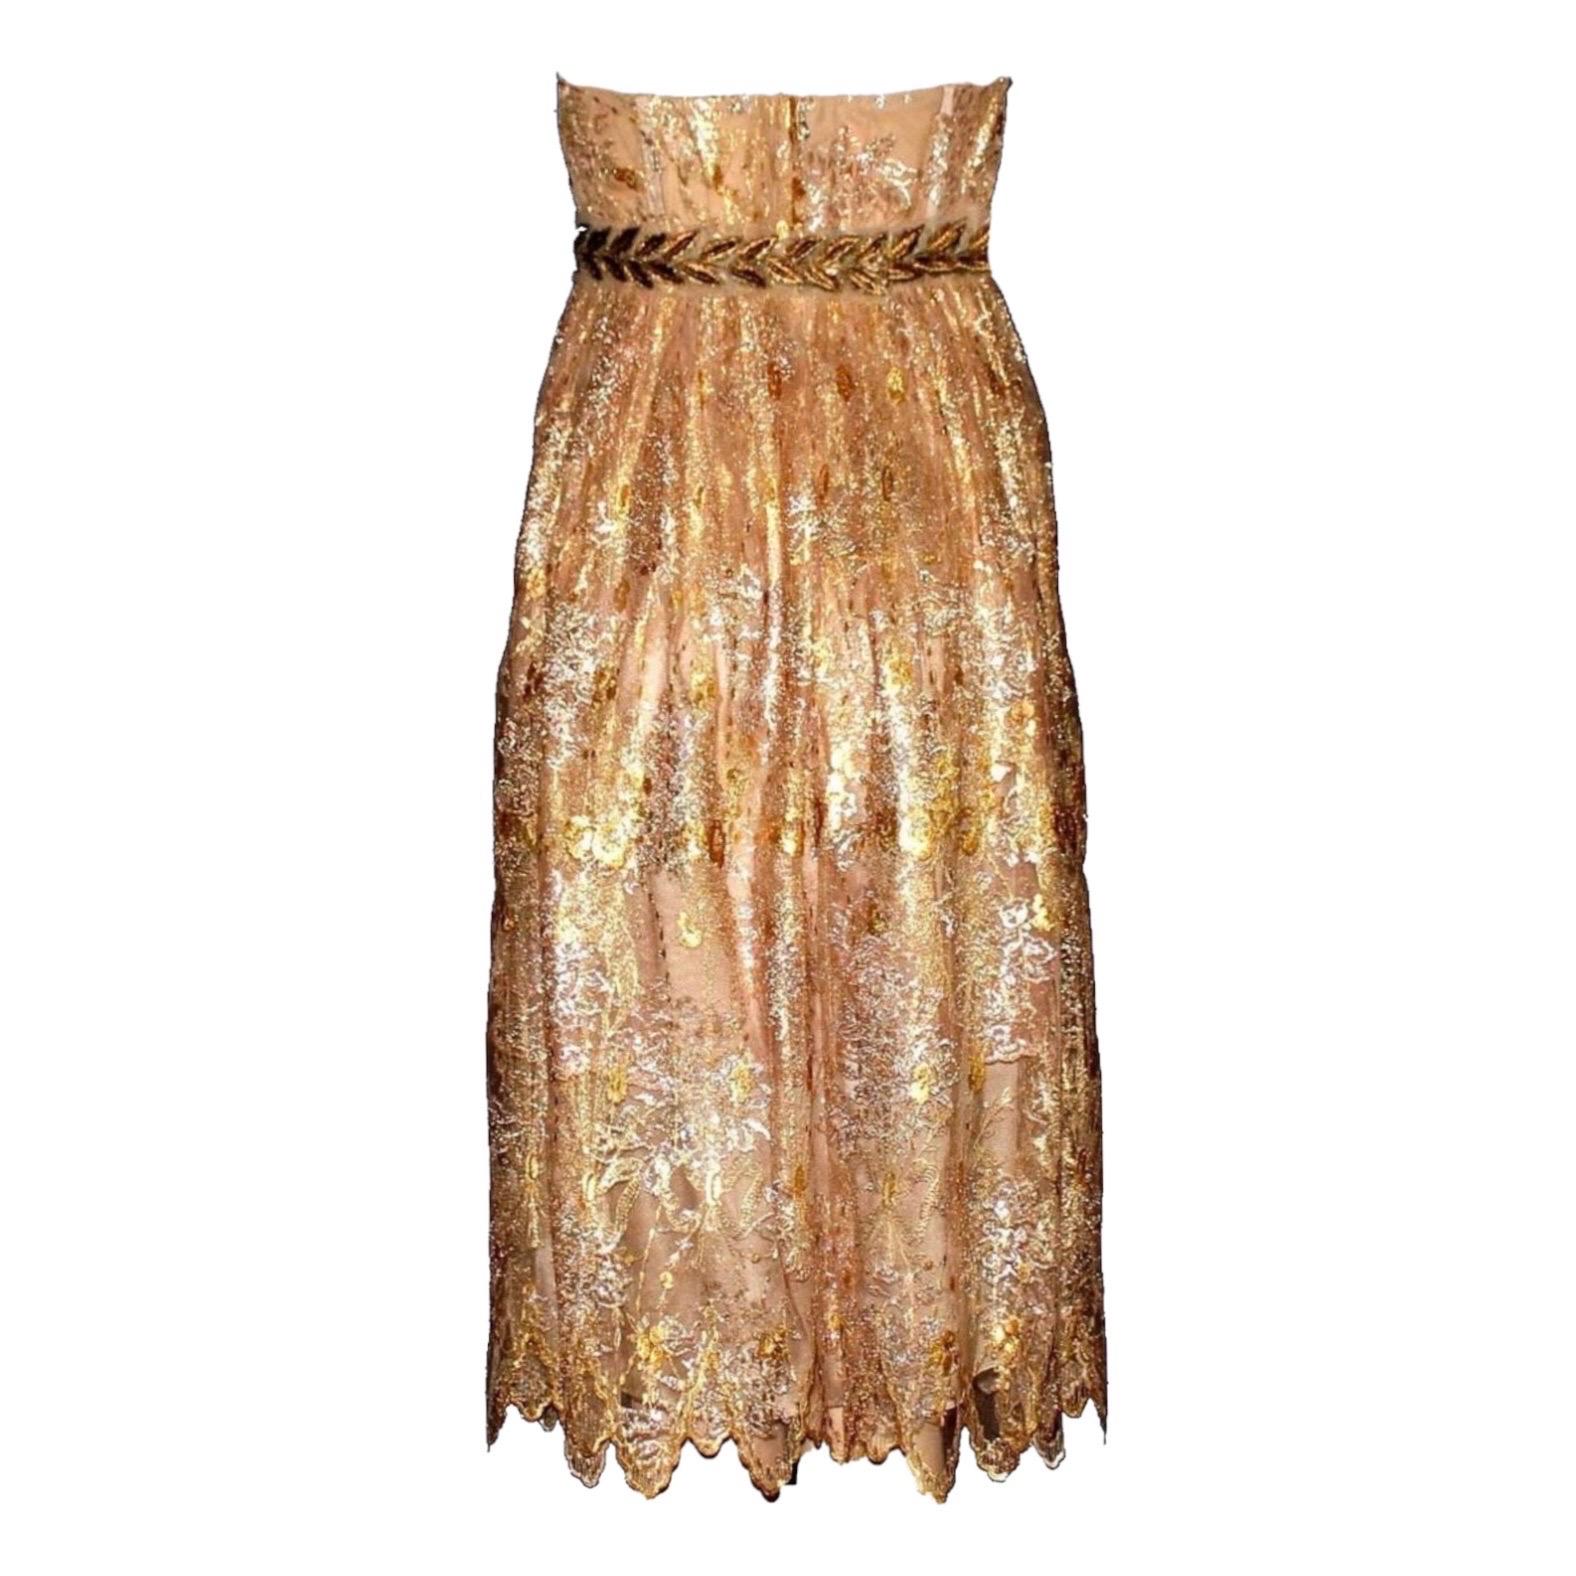 GORGEOUS DOLCE & GABBANA GOLDEN LACE DRESS

ONE OF THE MOST BEAUTIFUL PIECES BY

DOLCE & GABBANA

DETAILS:

    A DOLCE & GABBANA timeless classic signature piece that will last you for years
    Main line DOLCE & GABBANA
    Made out of the finest